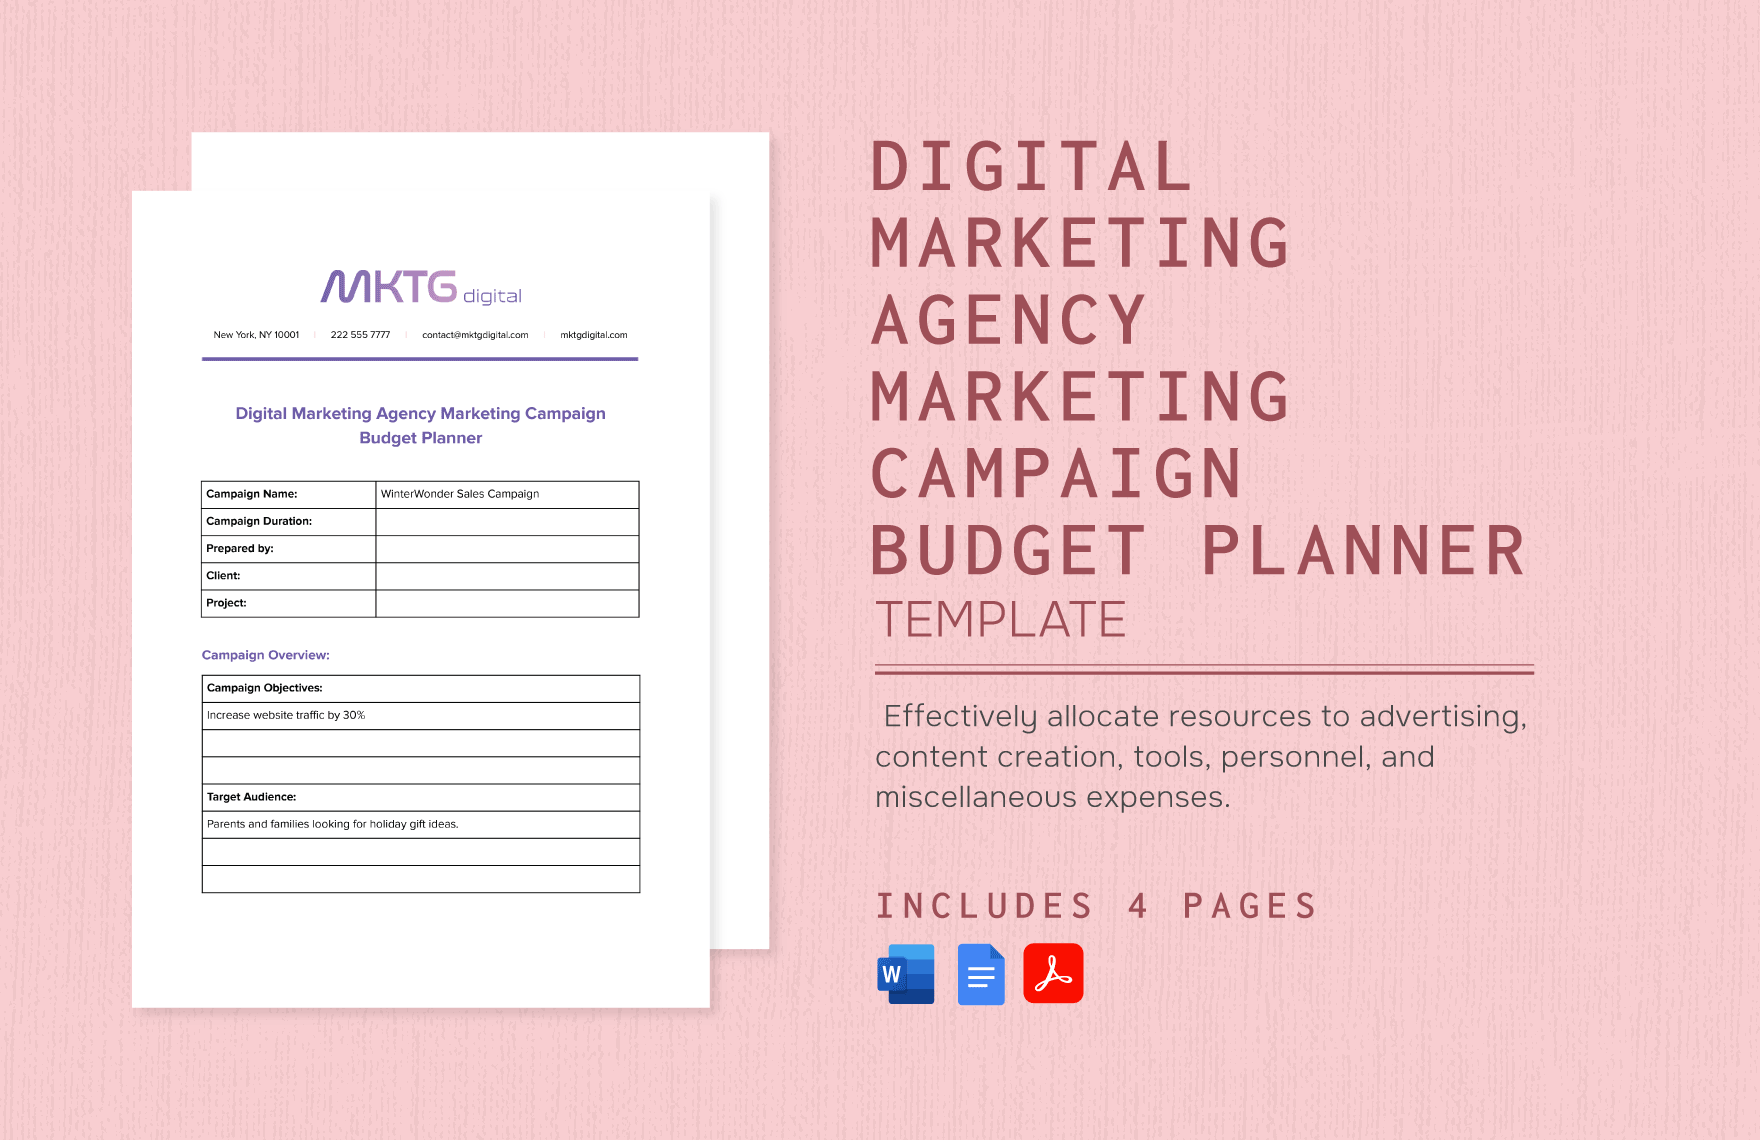 Digital Marketing Agency Marketing Campaign Budget Planner Template